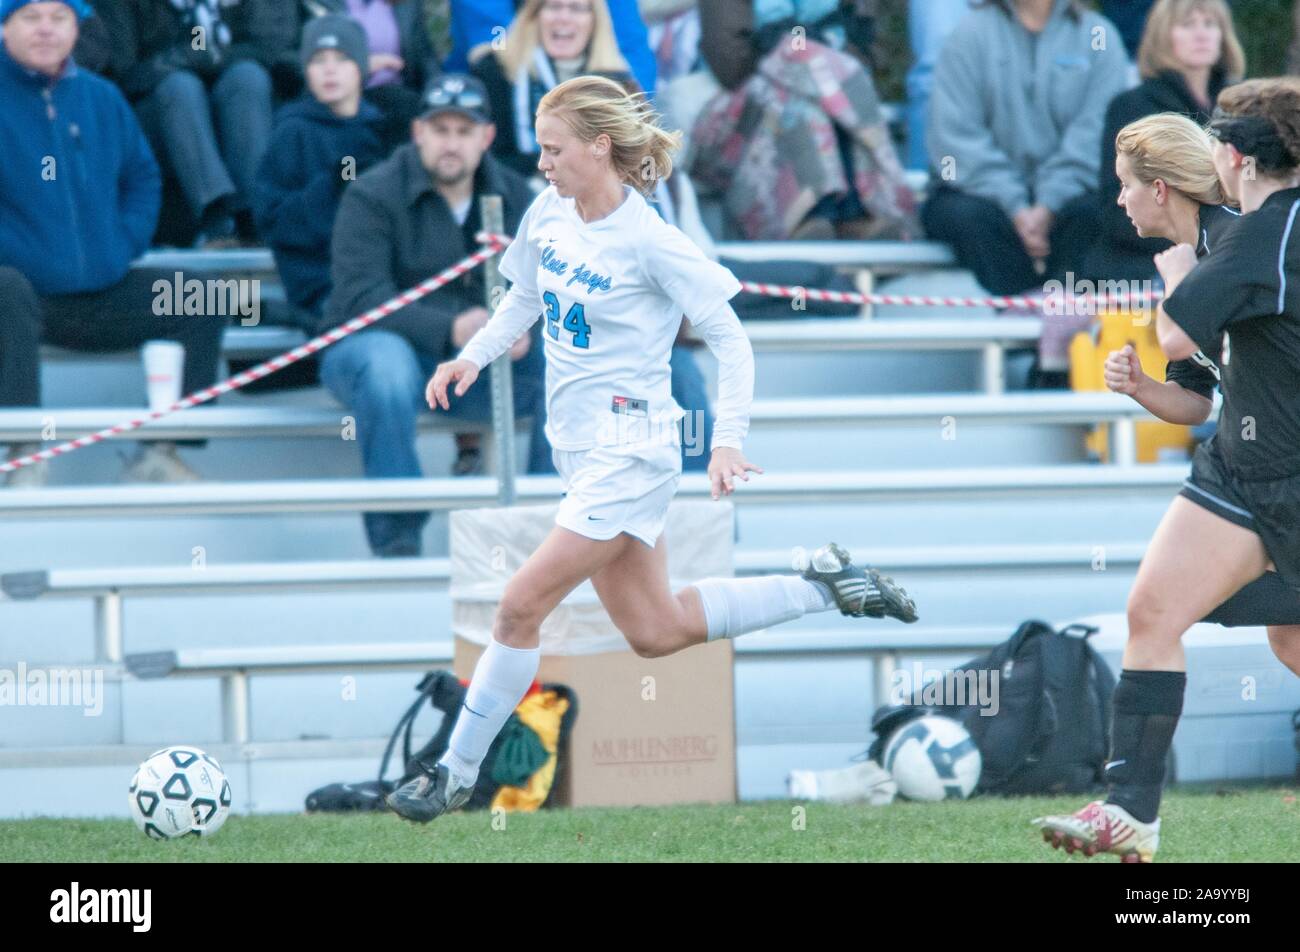 Full-length profile shot of a Johns Hopkins University Women's Soccer player, running behind the ball during a Centennial Conference semifinals match with Haverford College, November 7, 2009. From the Homewood Photography Collection. () Stock Photo